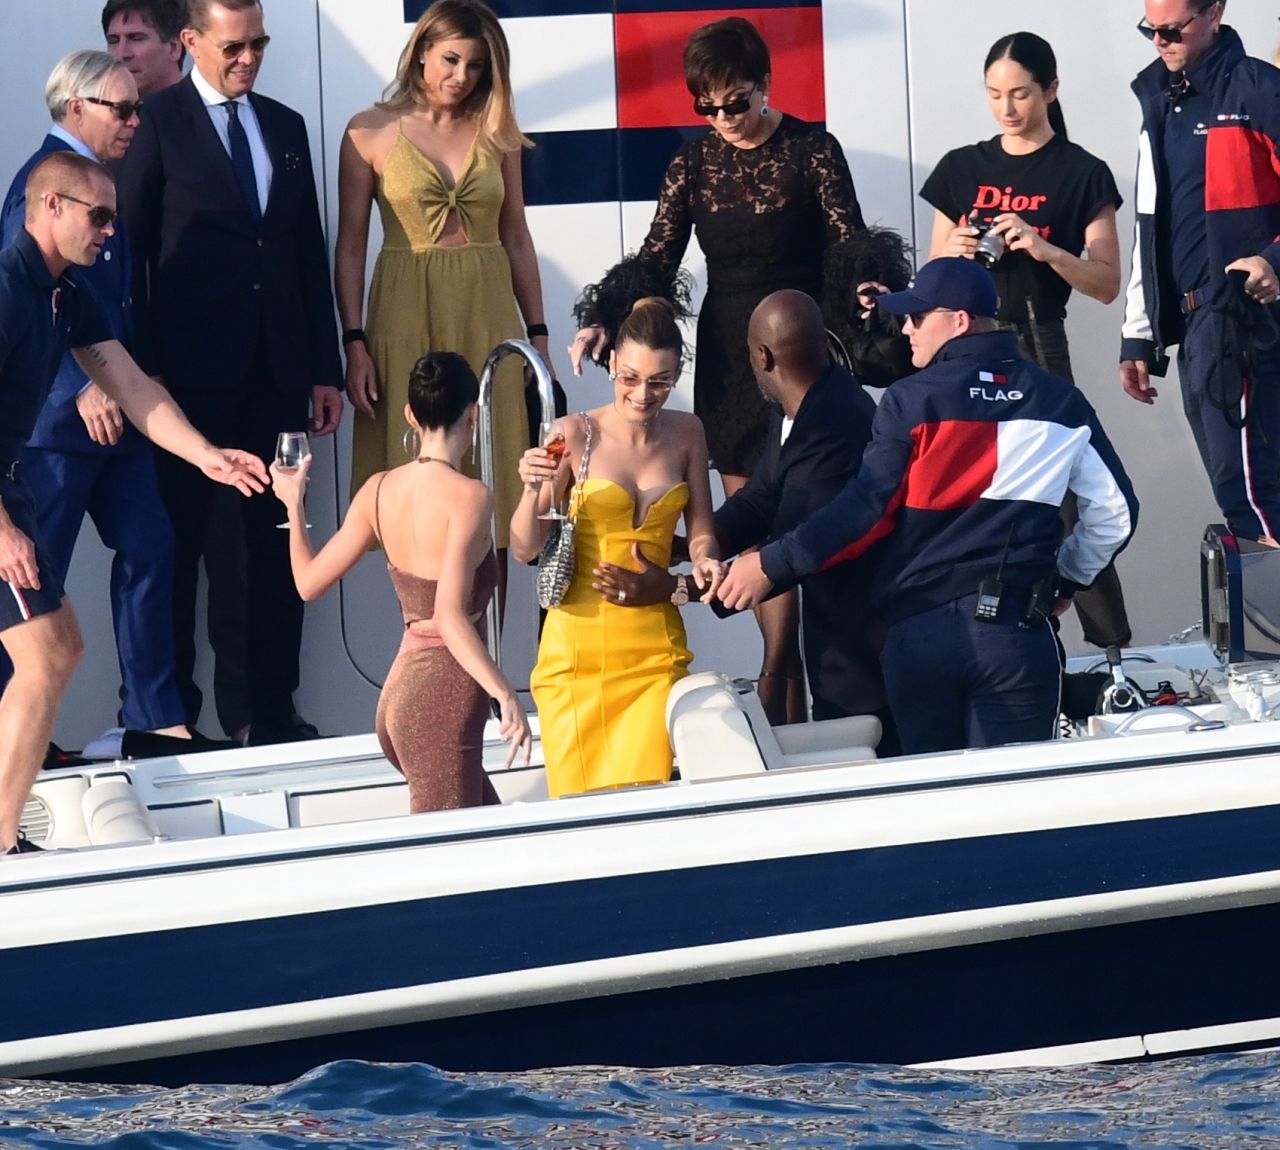 bella-hadid-and-kendall-jenner-tommy-hilfigers-yacht-in-monaco-05-25-2019-22.jpg